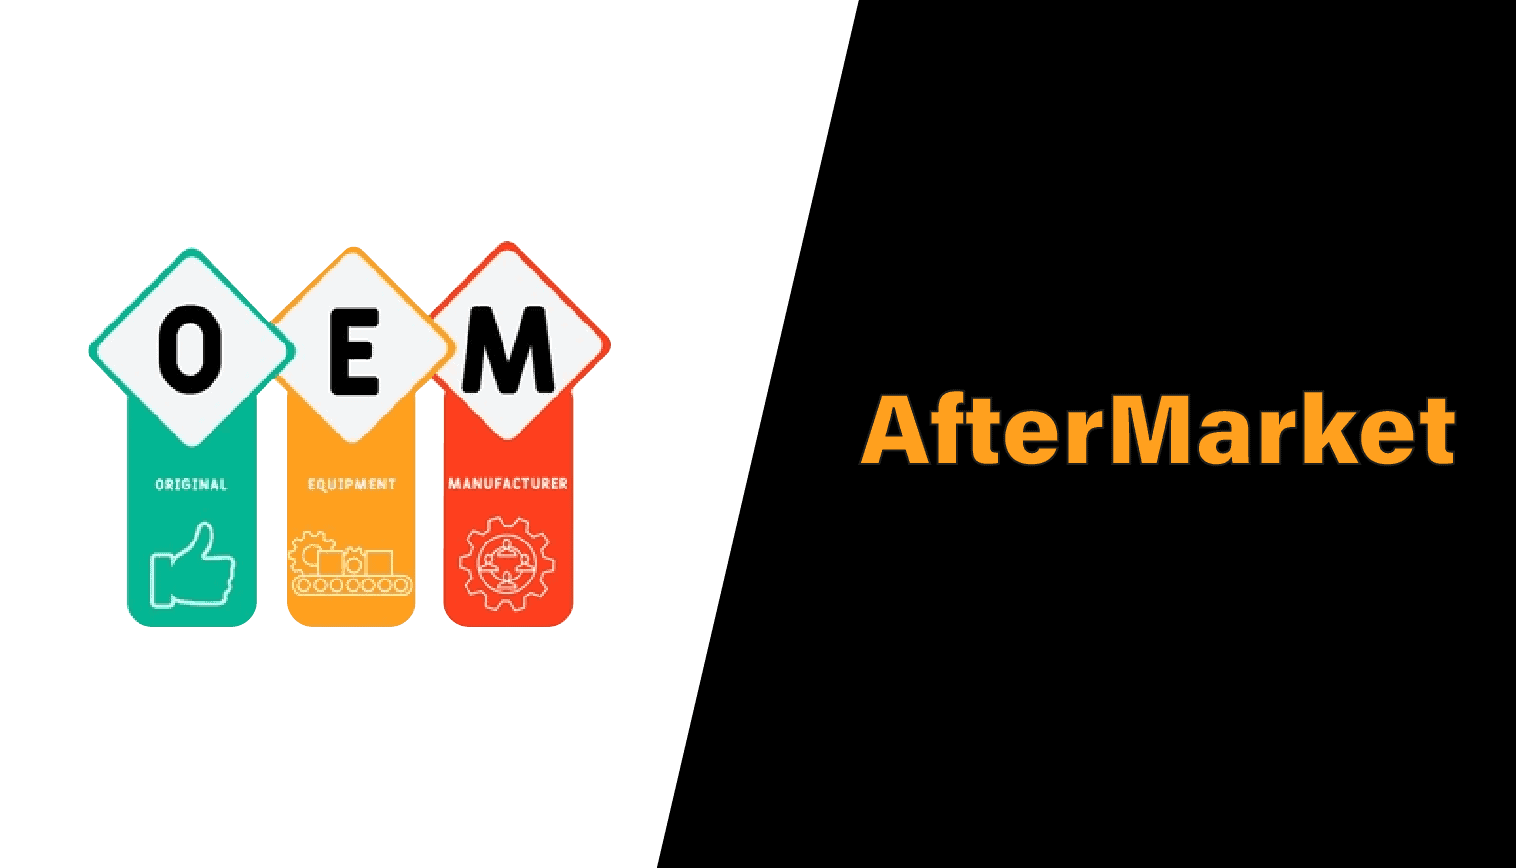 OEM vs Aftermarket - Which is better?